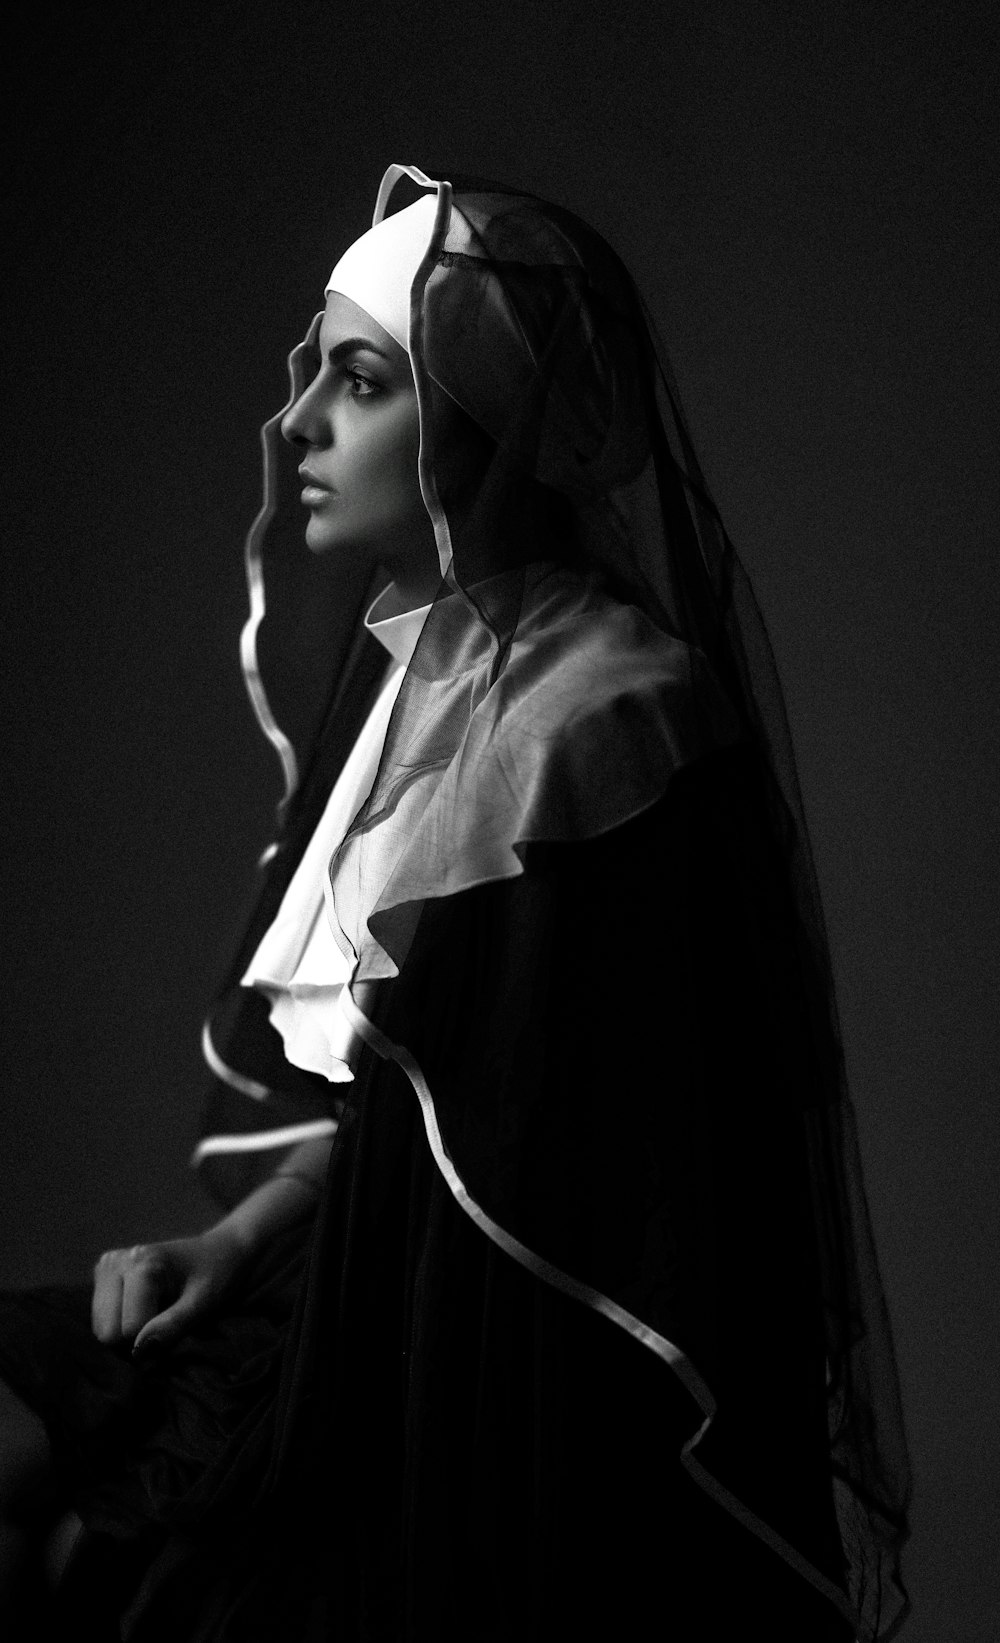 a black and white photo of a woman wearing a veil